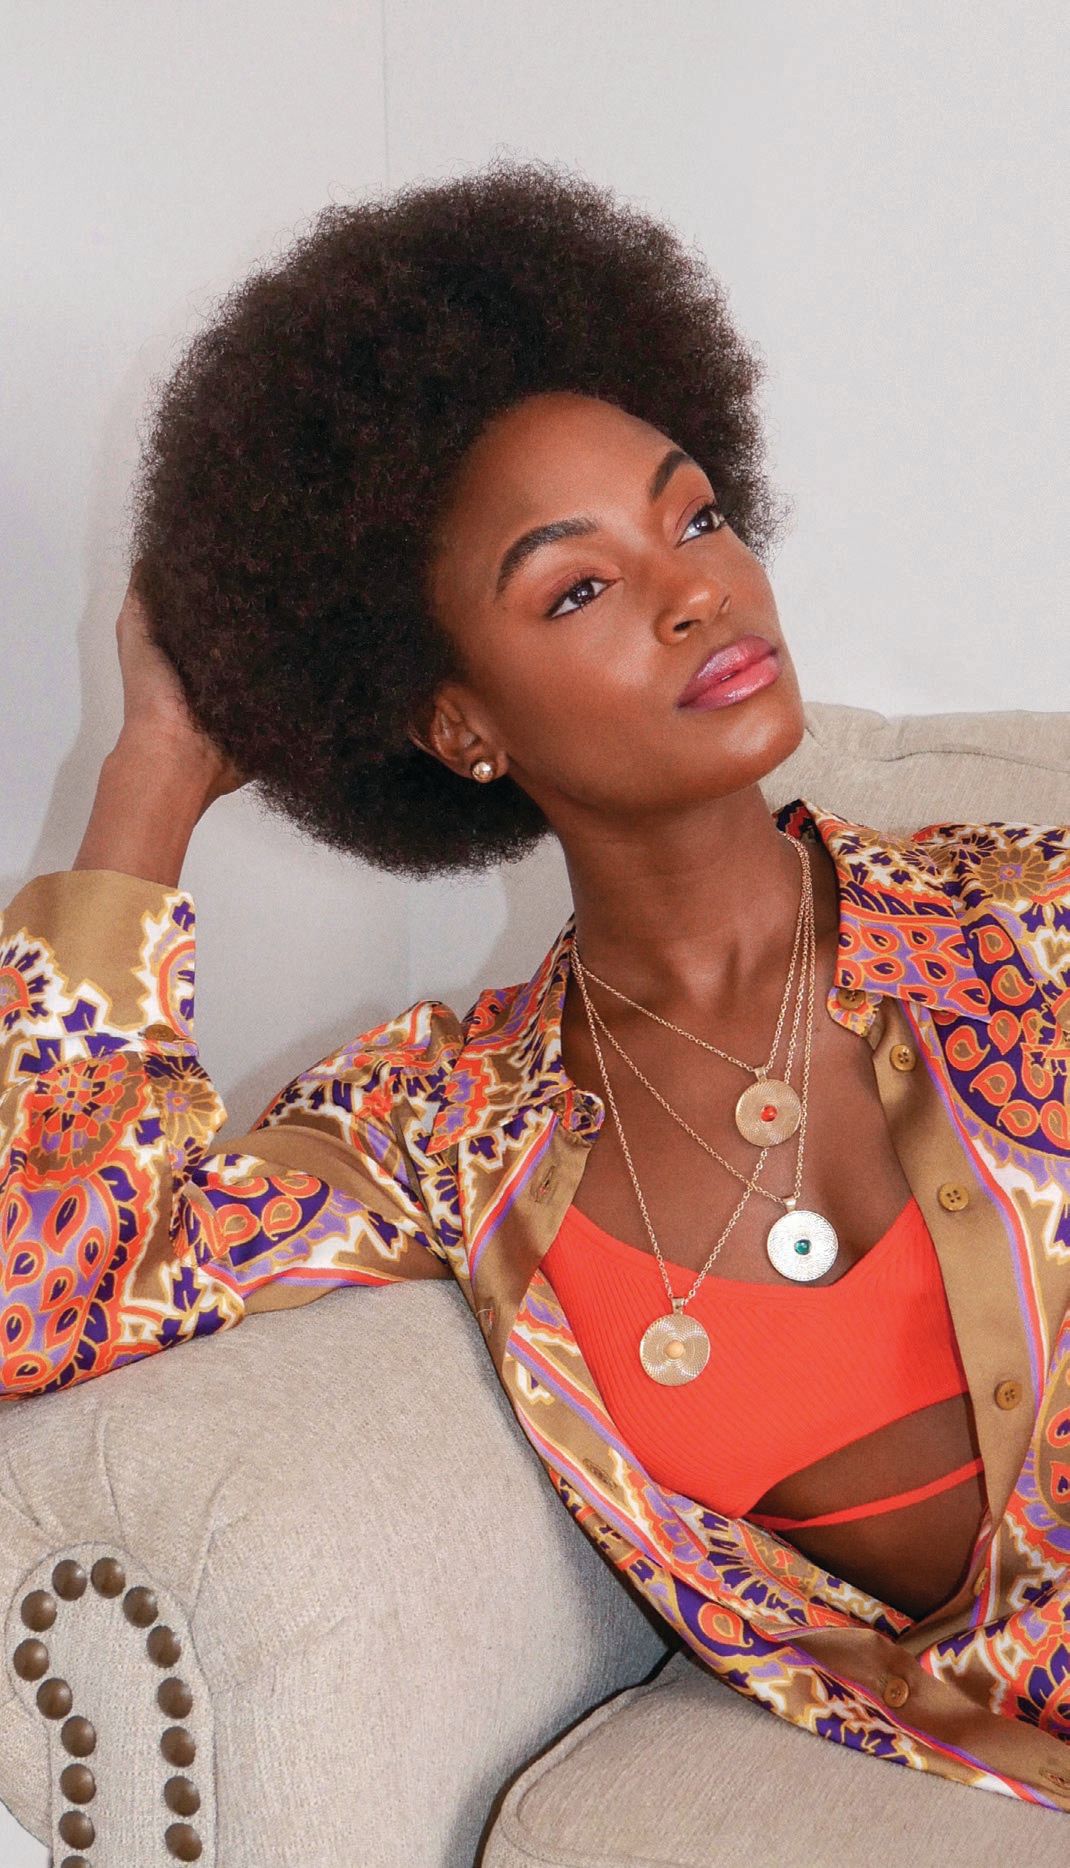 Check Out Model Tanaye White's New Female Wellness Company